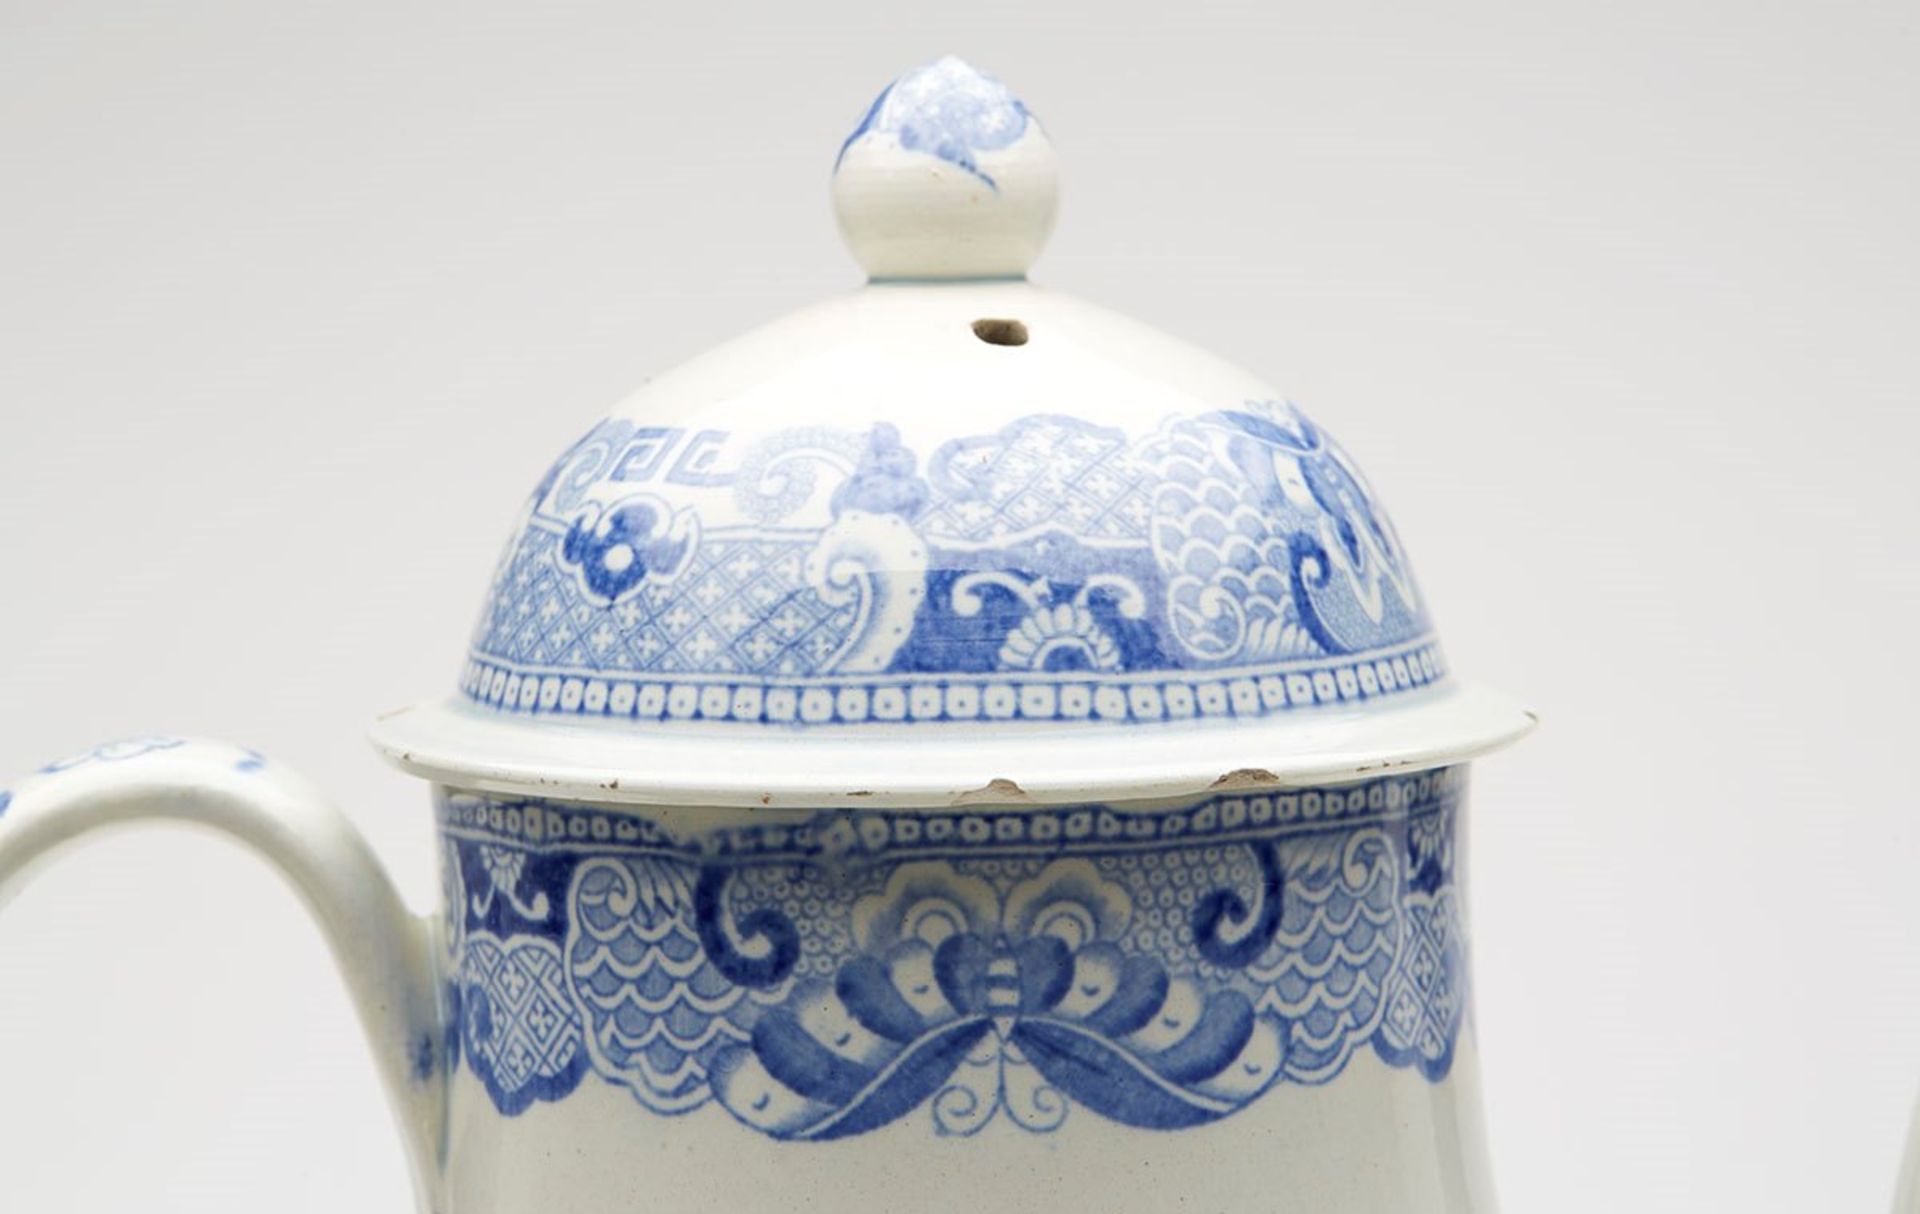 ANTIQUE ENGLISH CHINOISERIE BLUE & WHITE TEAPOT 19TH C.   DIMENSIONS   Height 27cm, Width 23,5cm - Image 9 of 10